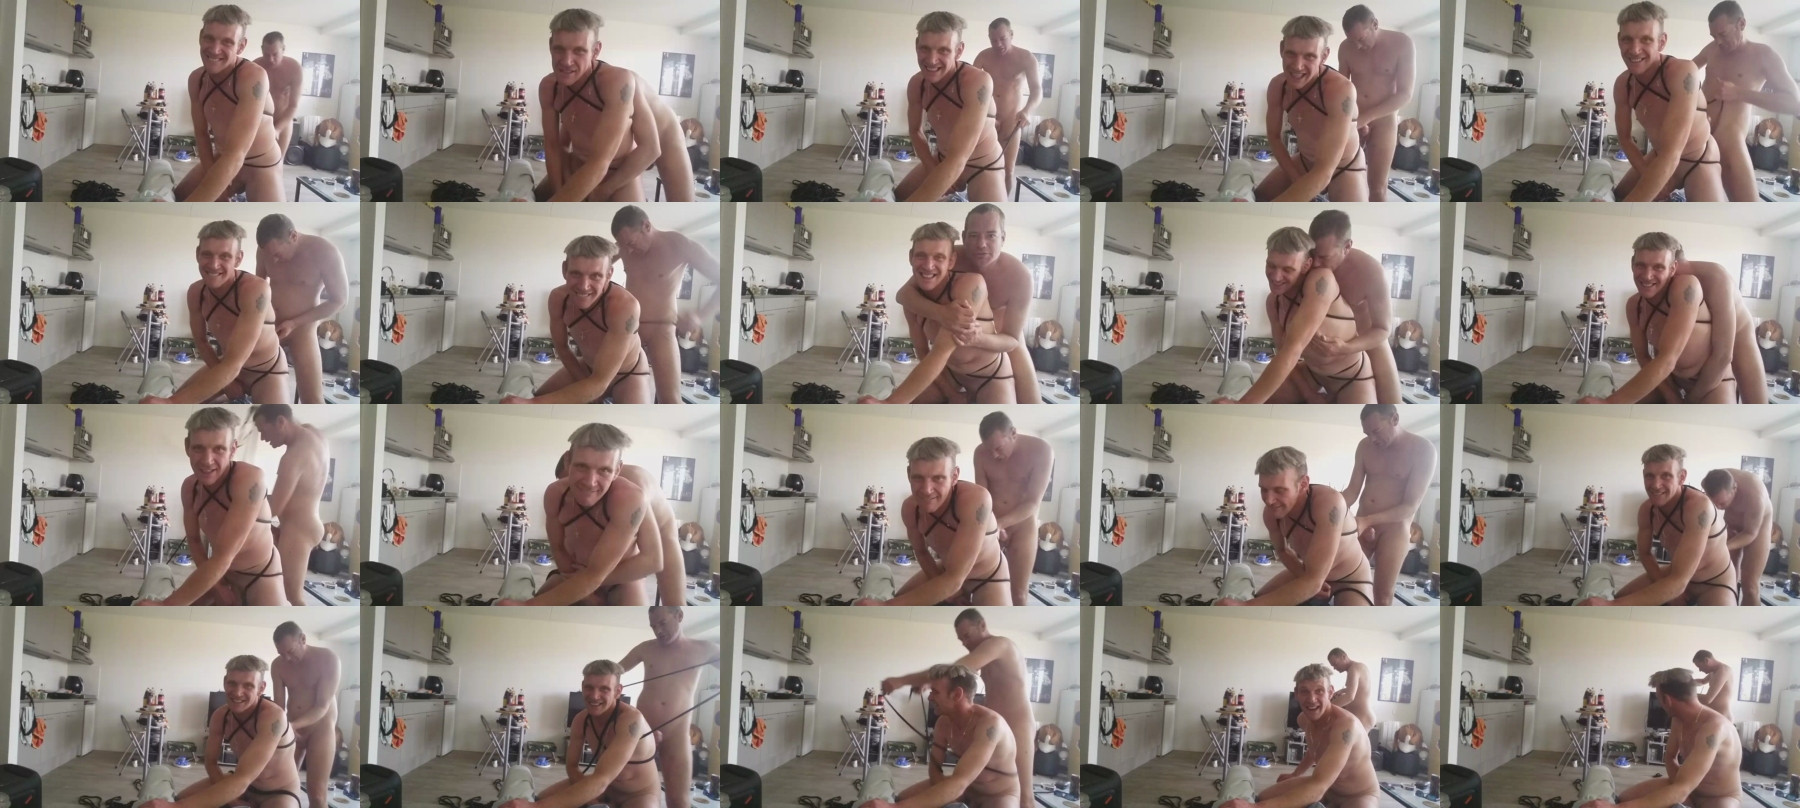 mikeynl2019  03-04-2021 Recorded Video Porn